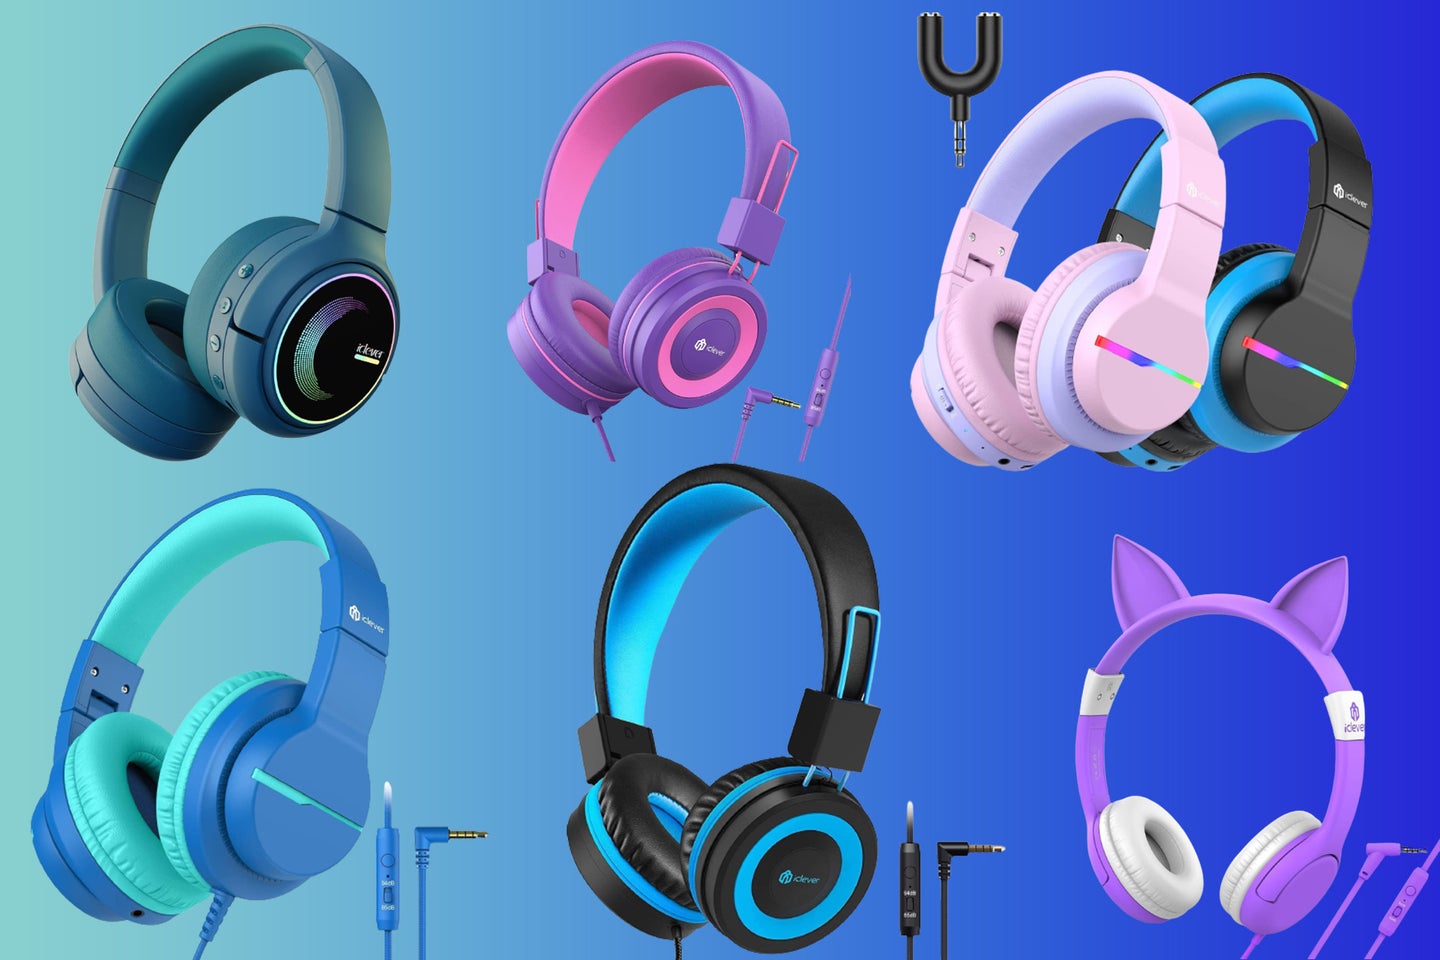 A pair of kids headphones on a light blue and dark blue gradient background.